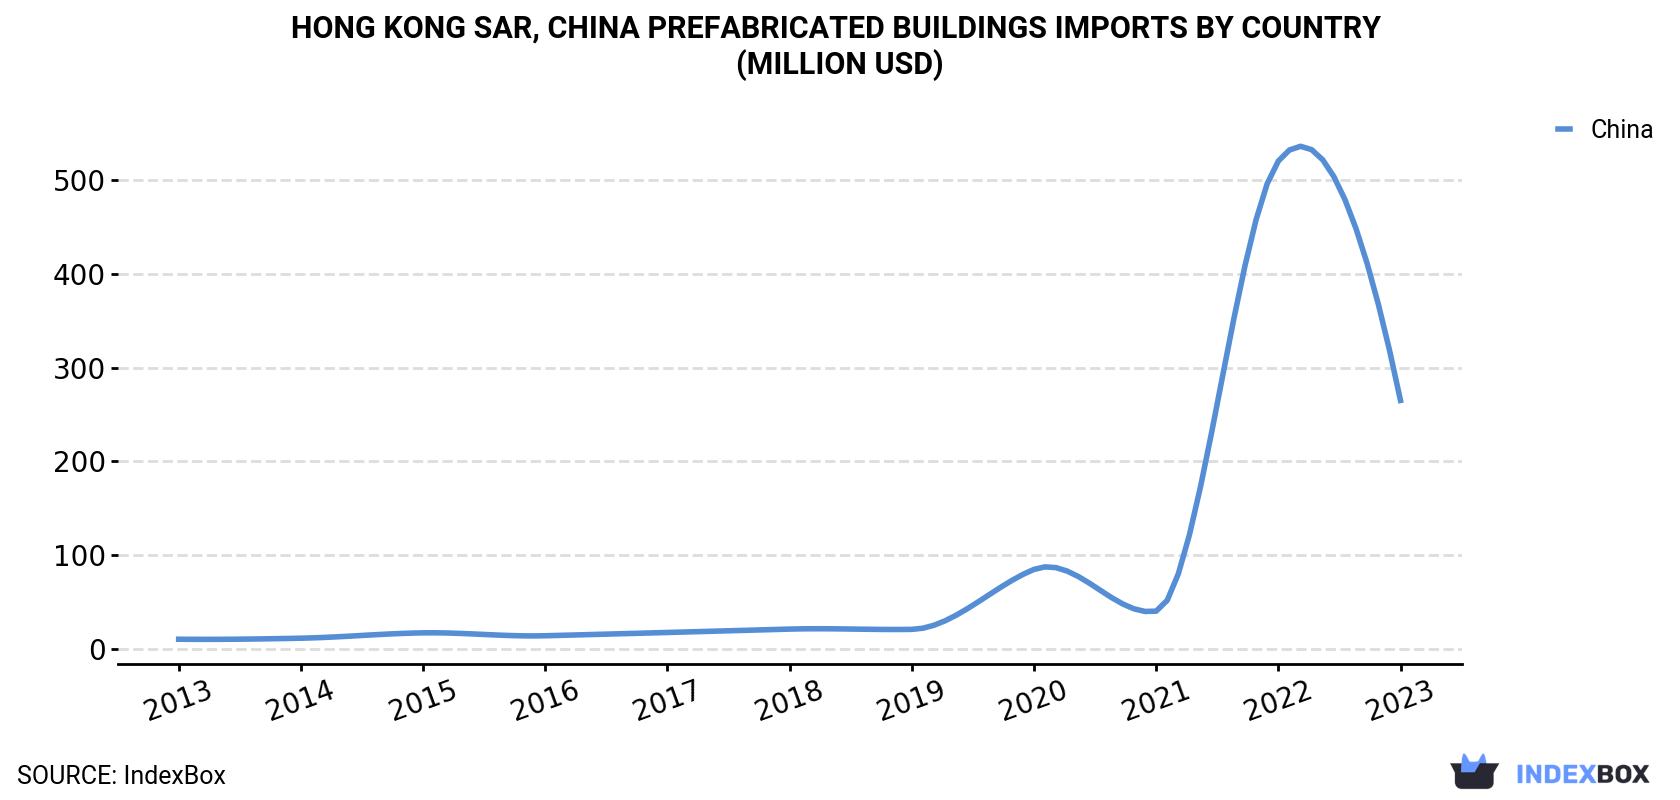 Hong Kong Prefabricated Buildings Imports By Country (Million USD)